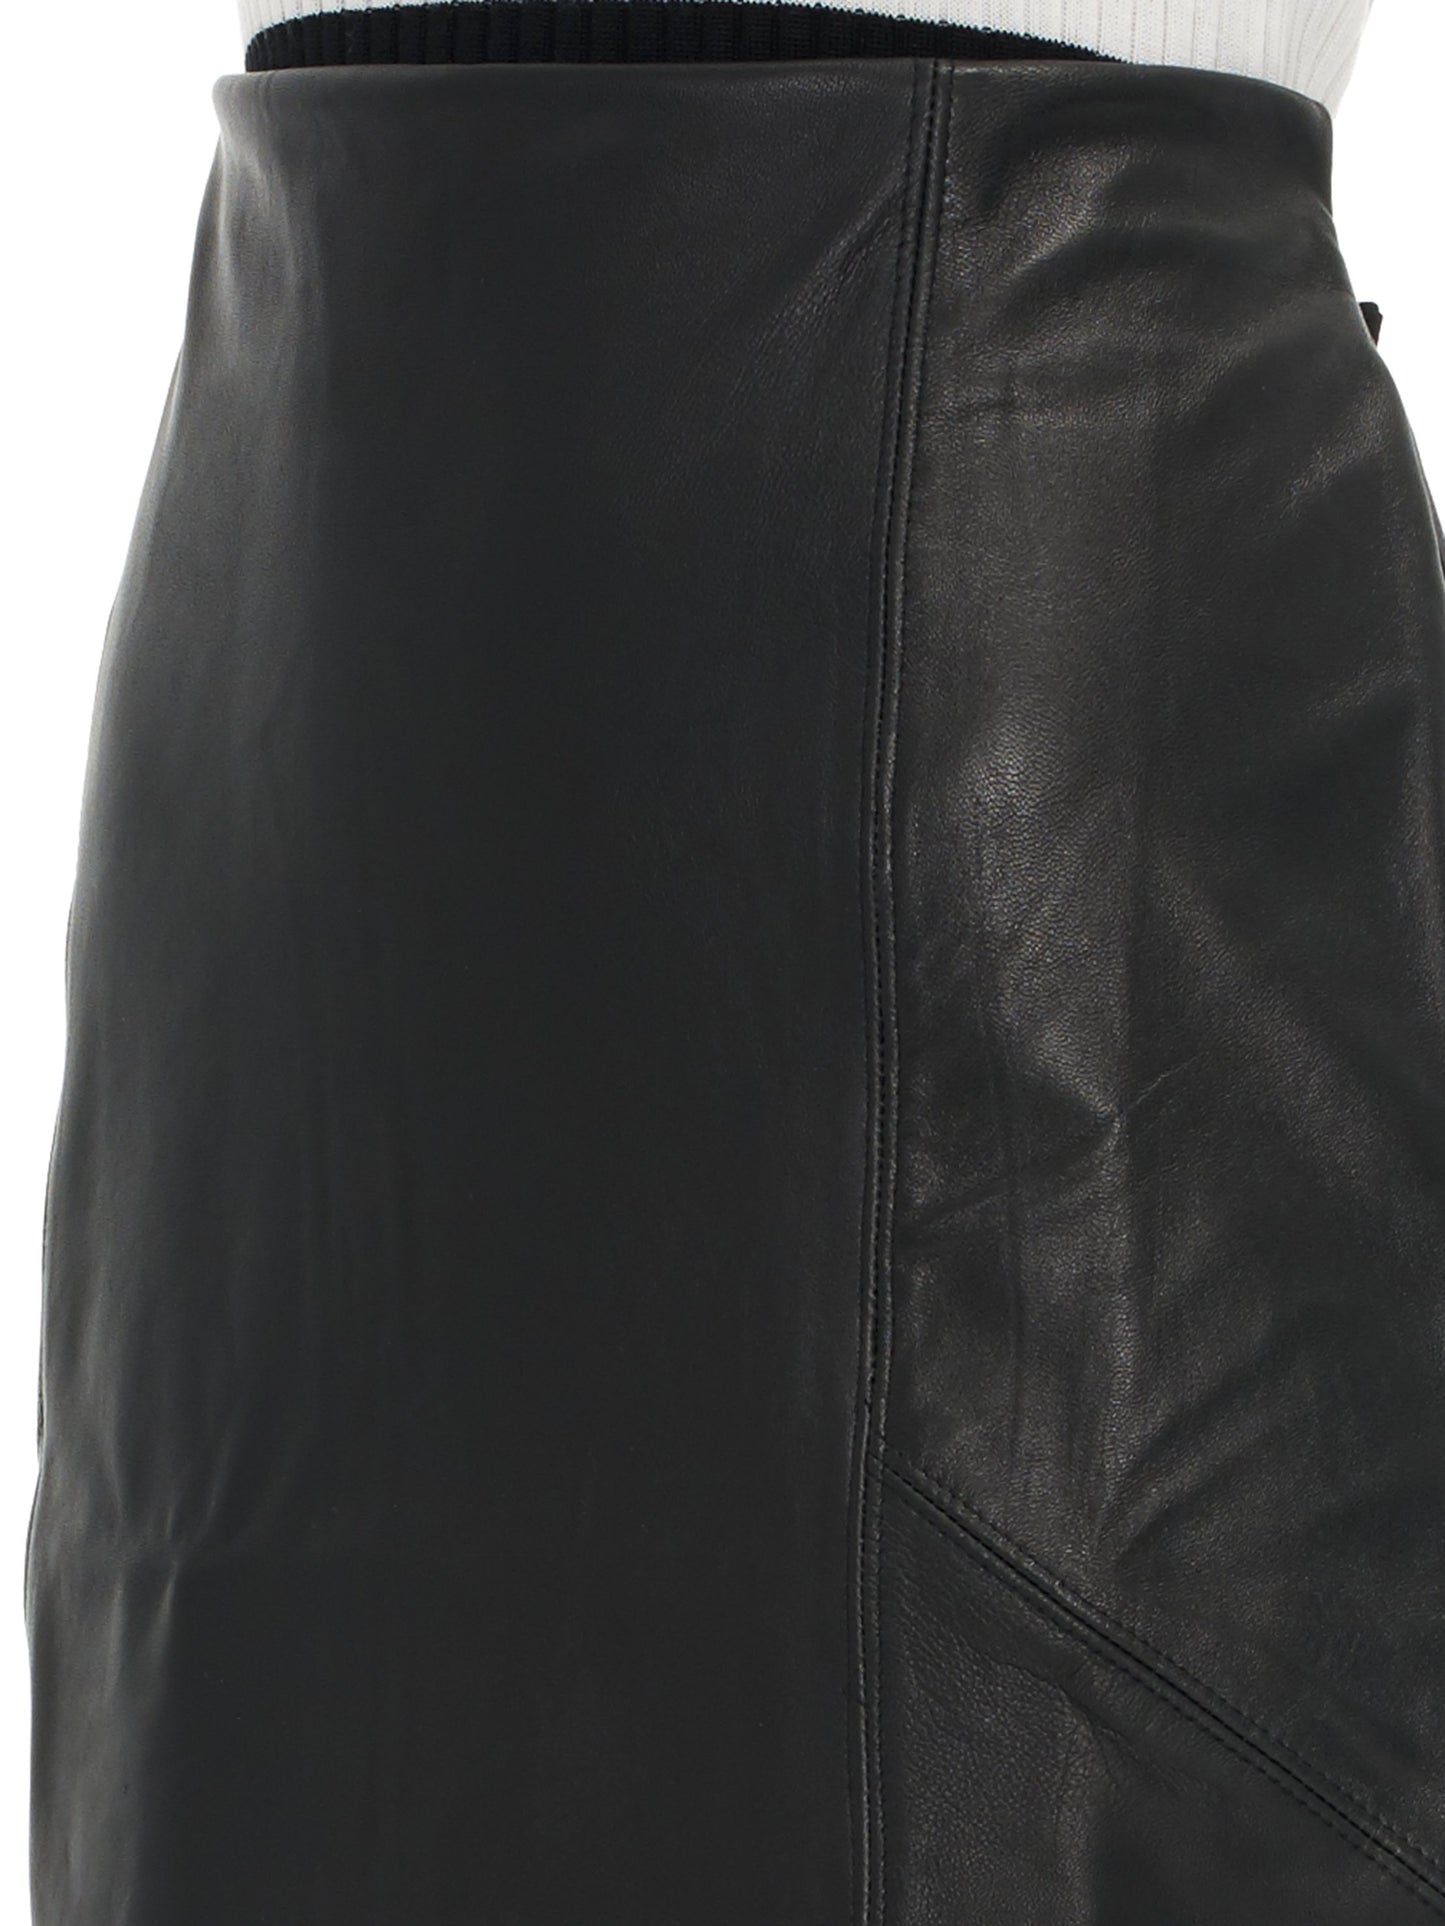 Sabatini Leather Front Black Skirt (S) - RRP $495.00